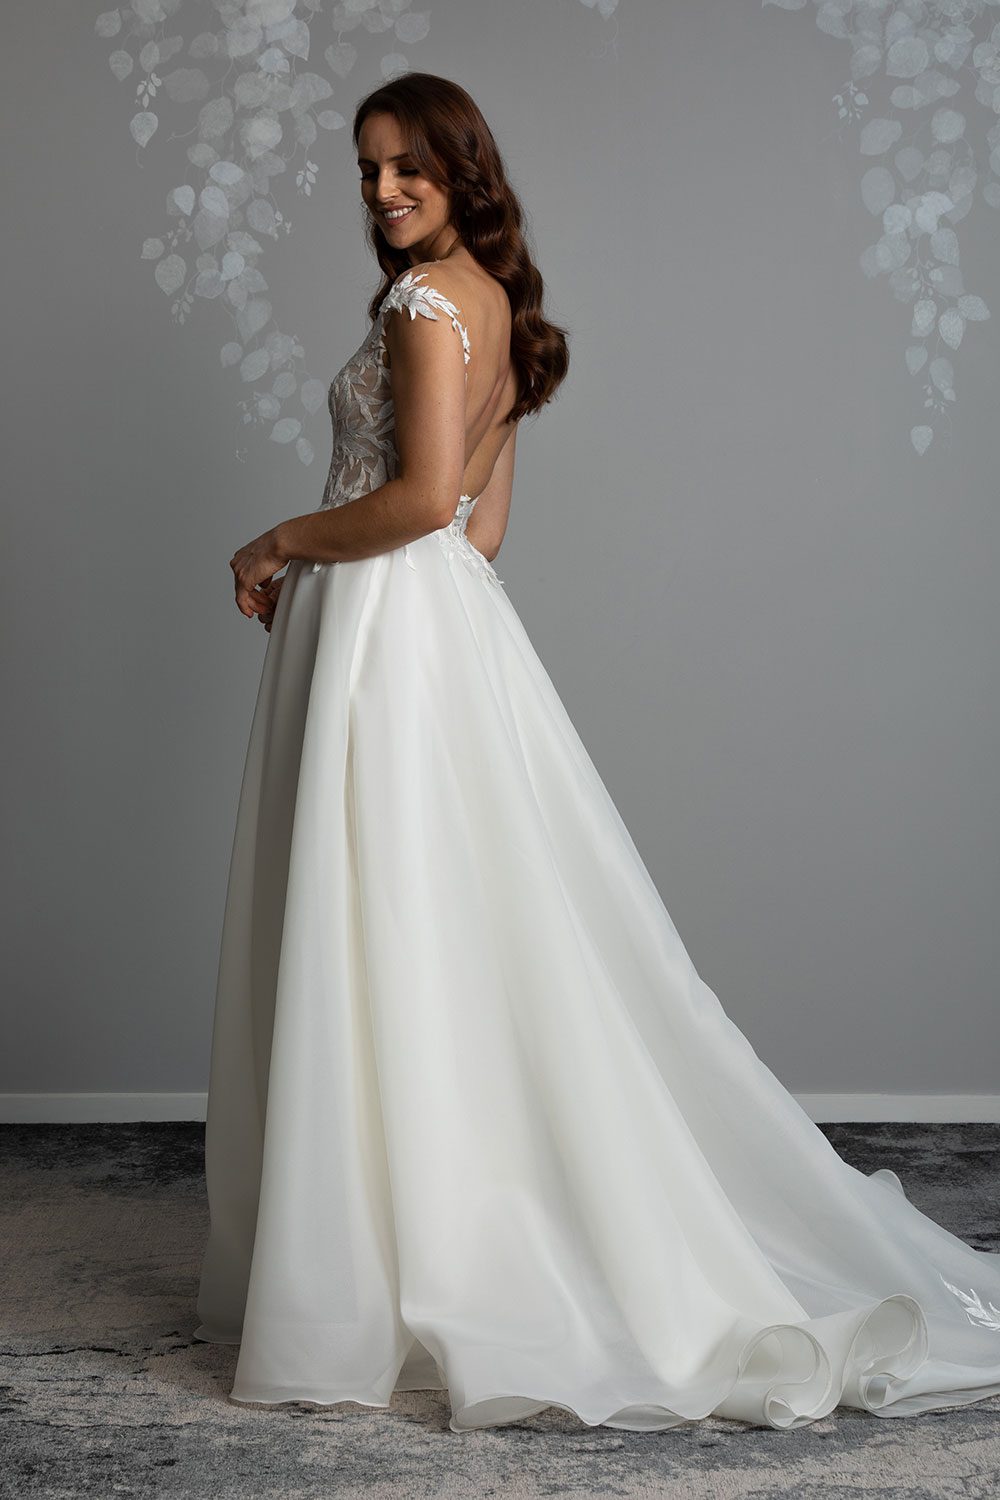 Ariana Wedding gown from Vinka Design - This gorgeous gown features delicate leaf lace hand-appliqued throughout the semi-sheer, structured bodice and up over the shoulder and skirt made of dreamy satin organza layers. Profile view of model showing off the long flowing train and low back with semi sheer lace detailing